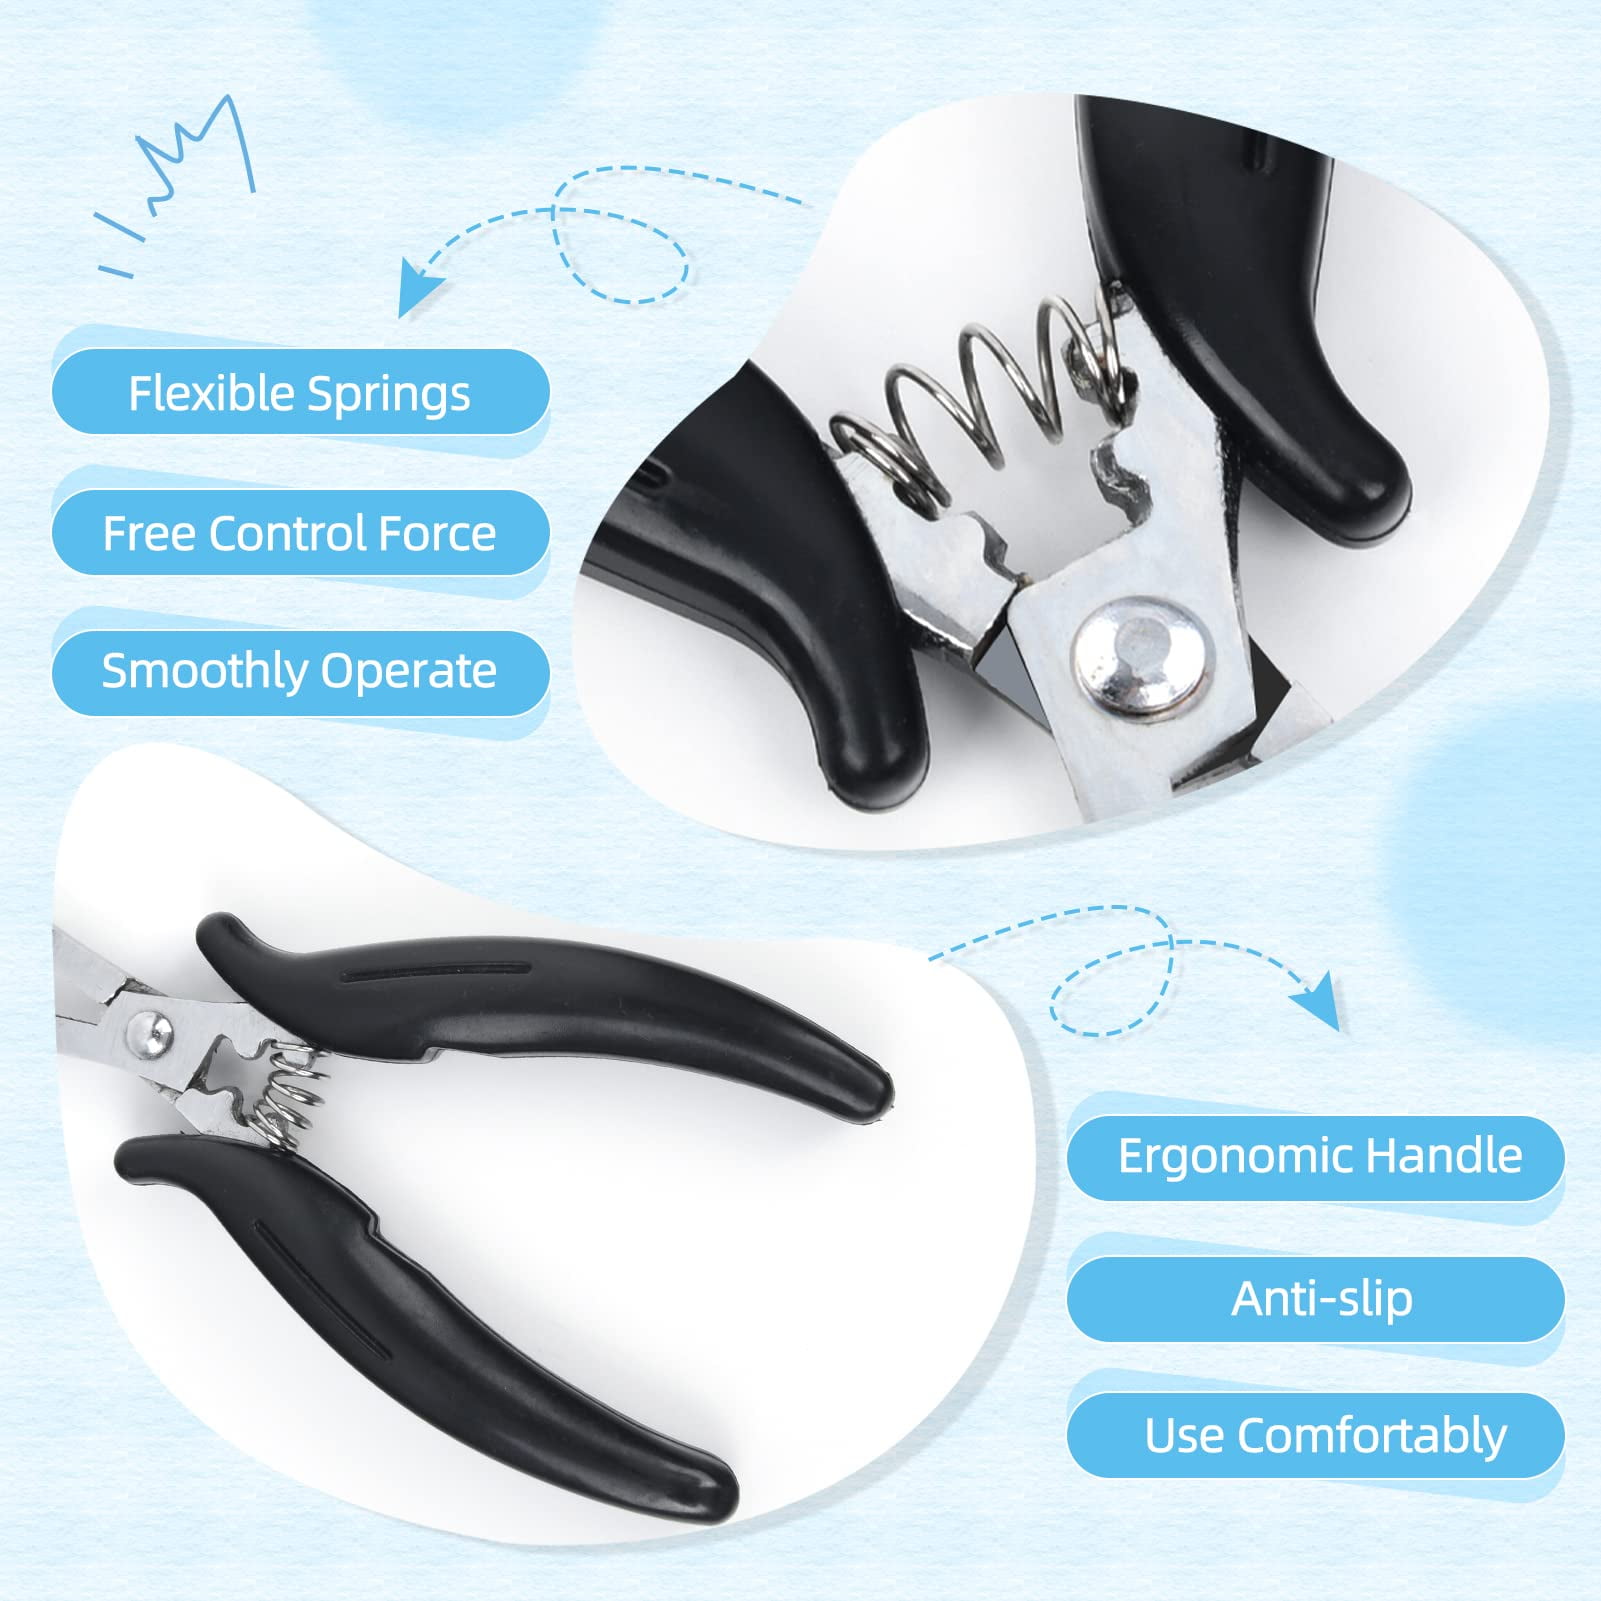 Hair Extension Removal Pliers - Crushed Bead Opener